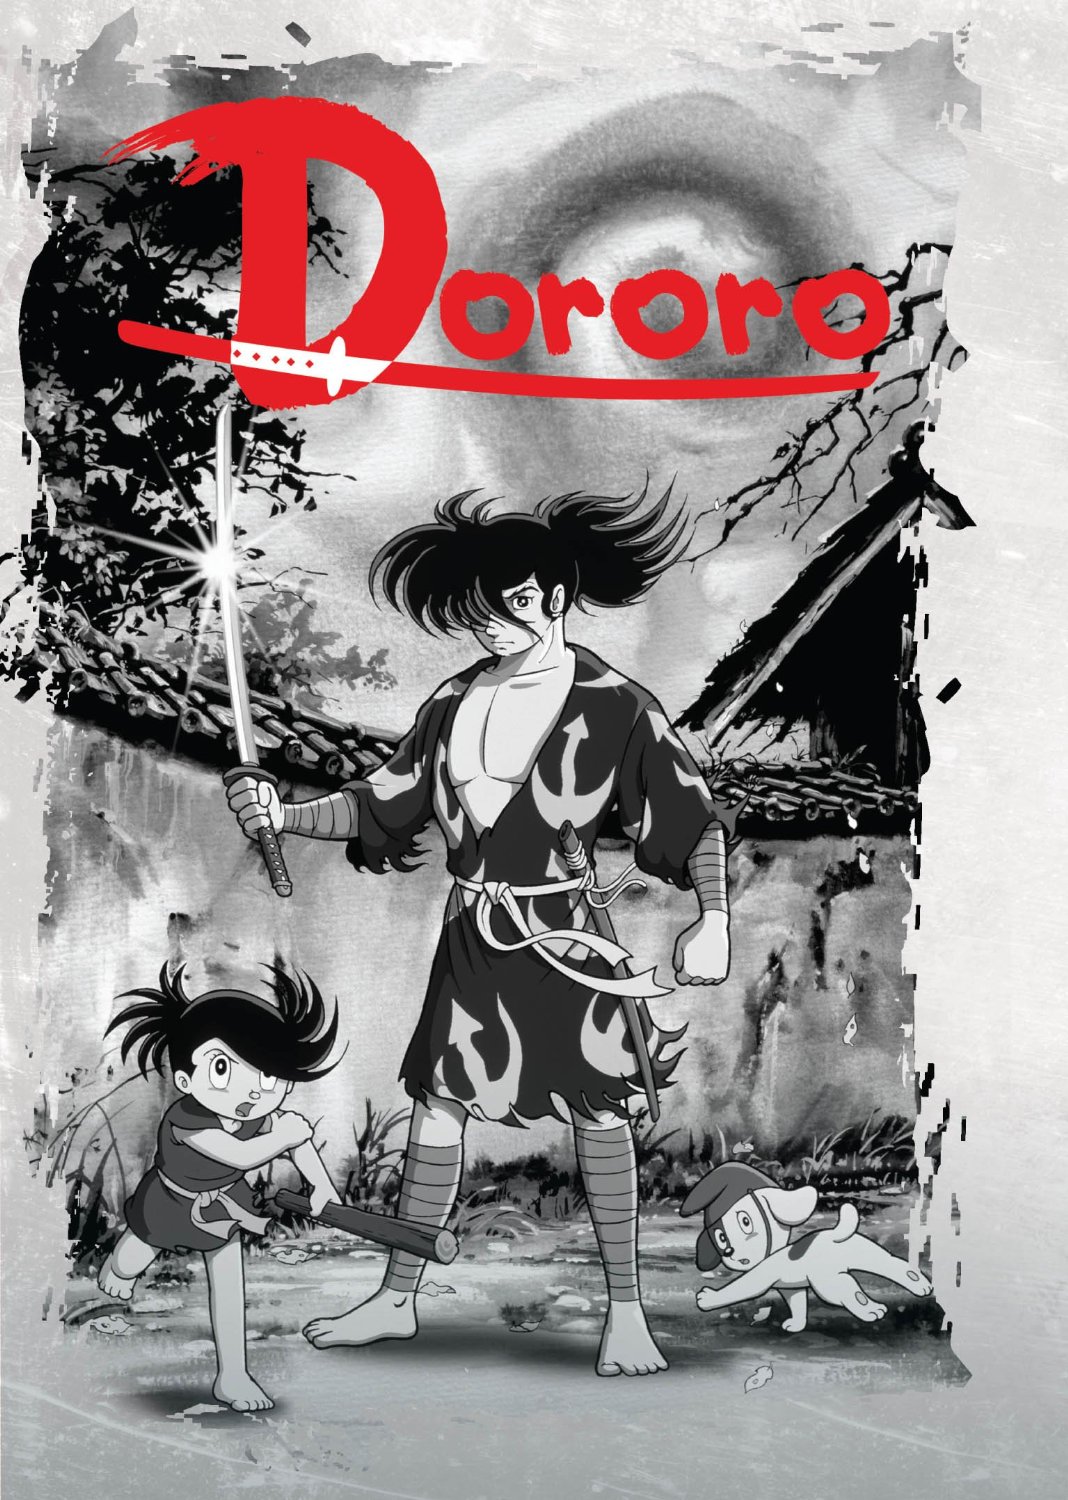 Dororo and Its New Adaptation The Legend of Dororo and Hyakkimaru Both Have  Something to Offer